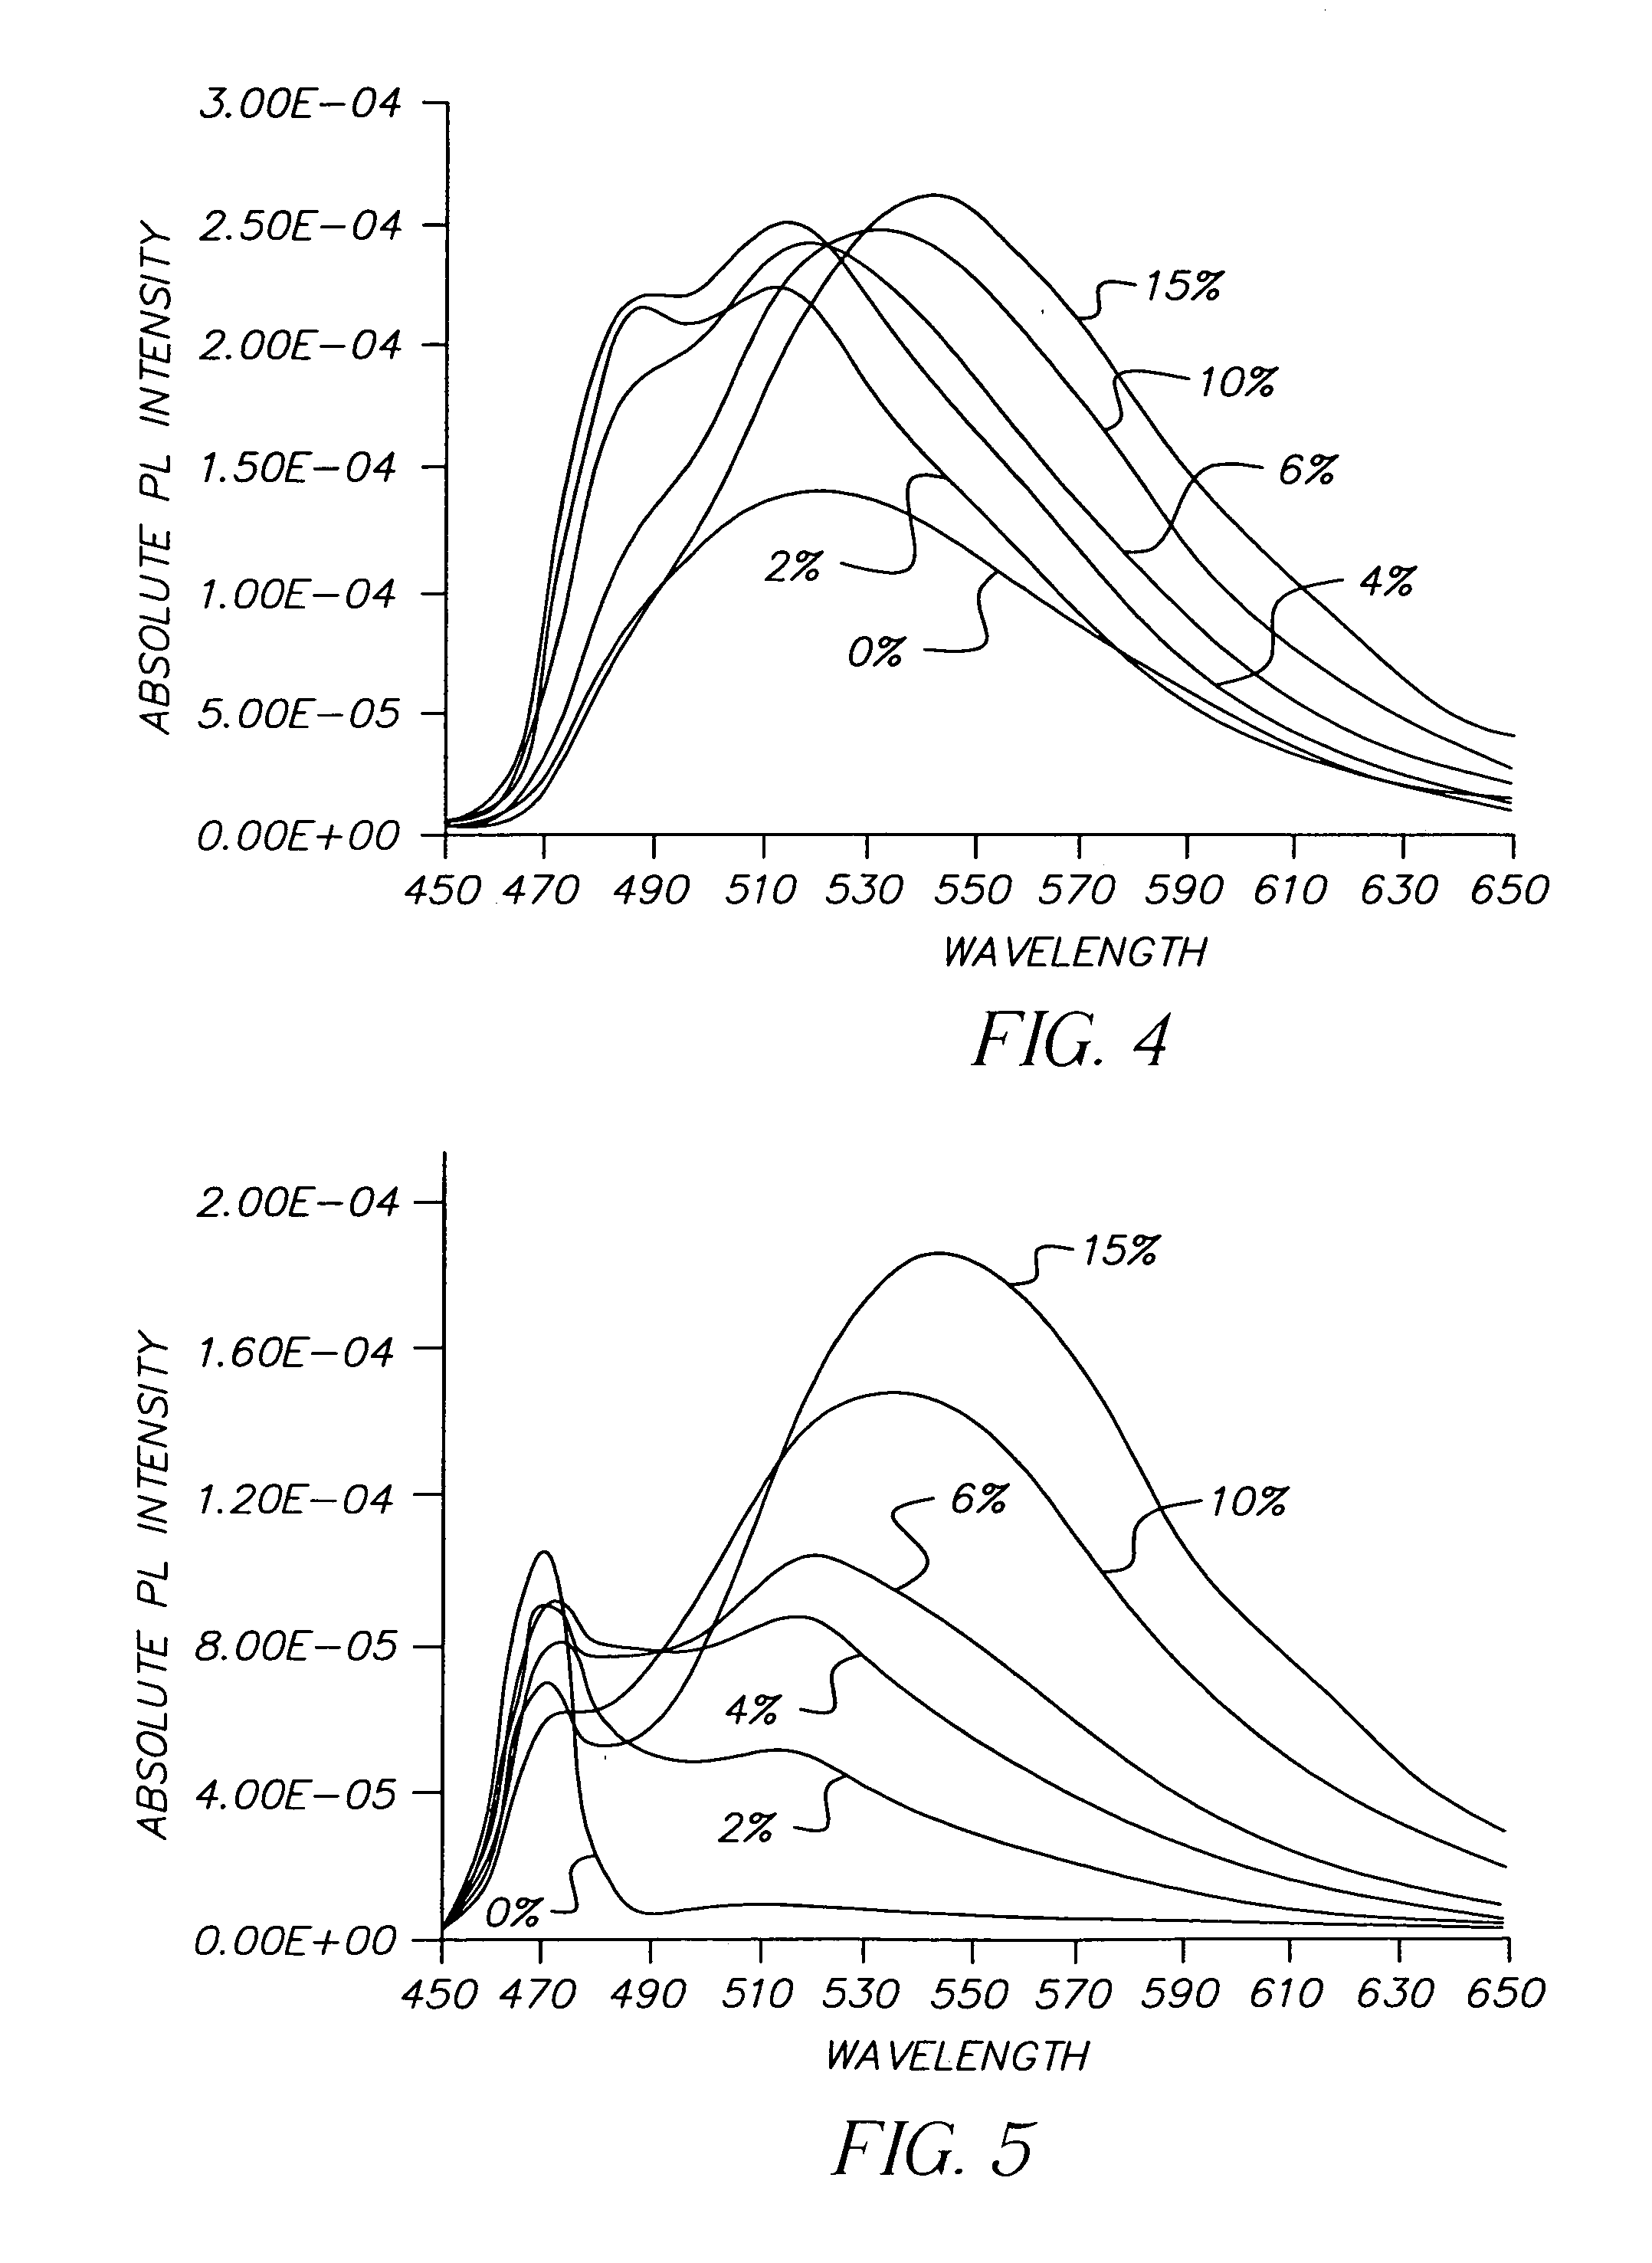 Organic light-emitting diode devices with improved operational stability